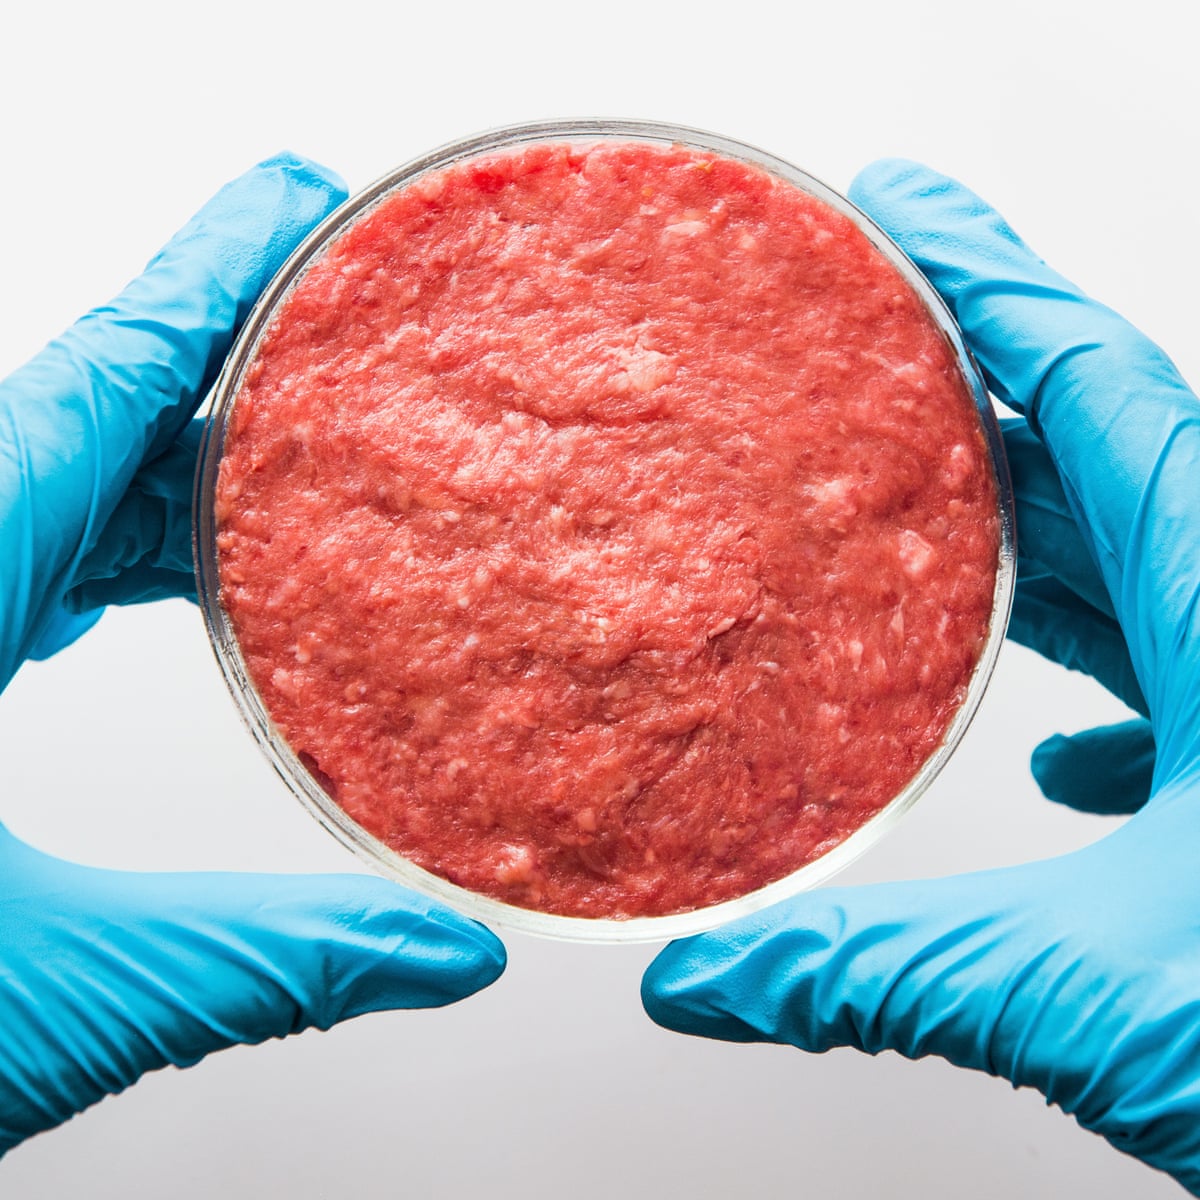 Man v food: is lab-grown meat really going to solve our nasty agriculture  problem? | Meat industry | The Guardian